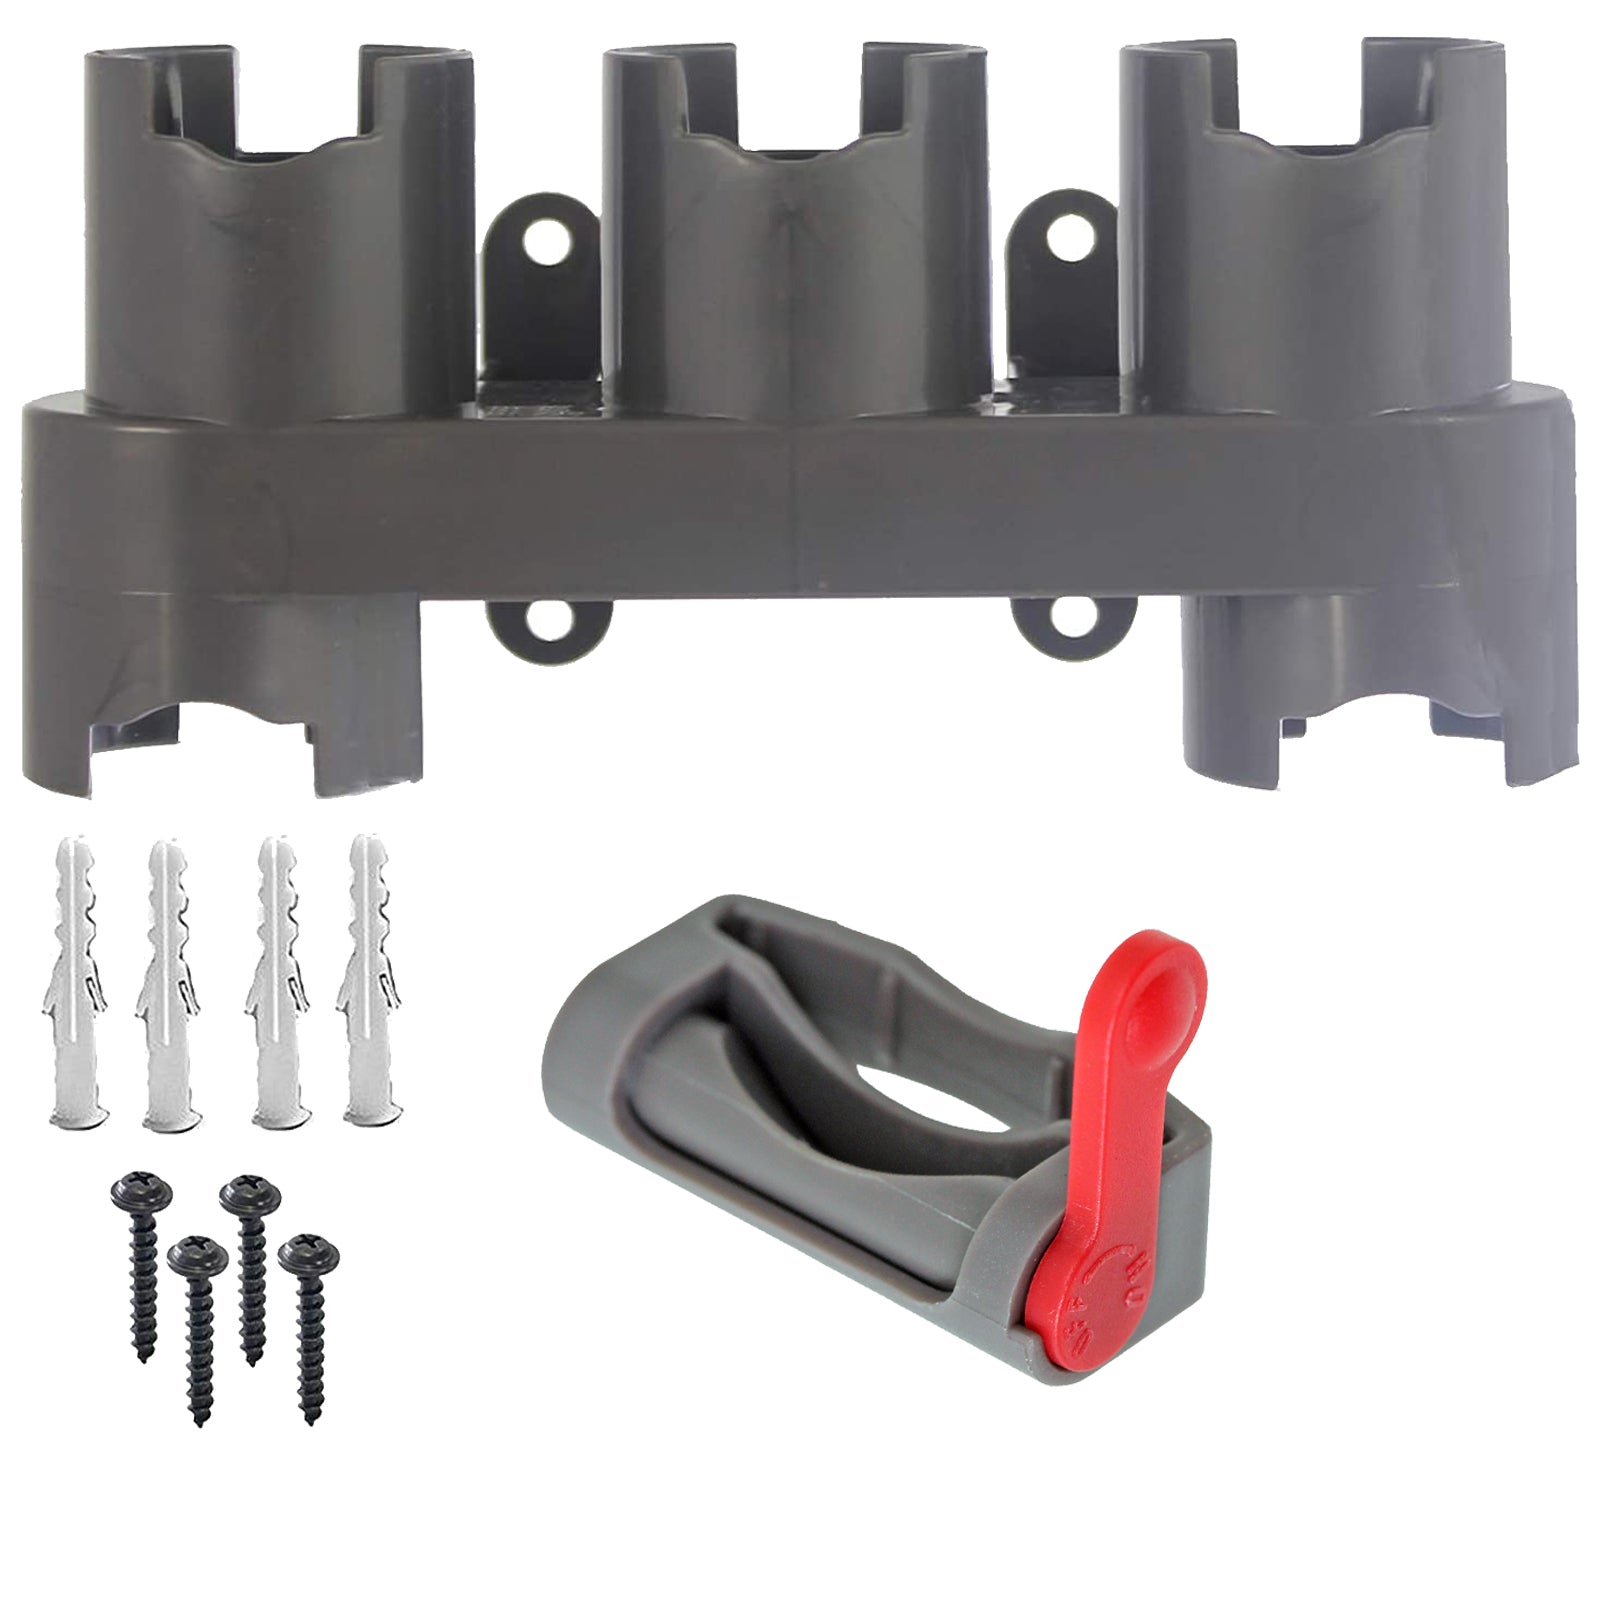 Wall Mounted Accessory Tool Holder Rack + Trigger Lock for DYSON V11 SV14 Vacuum Cleaner